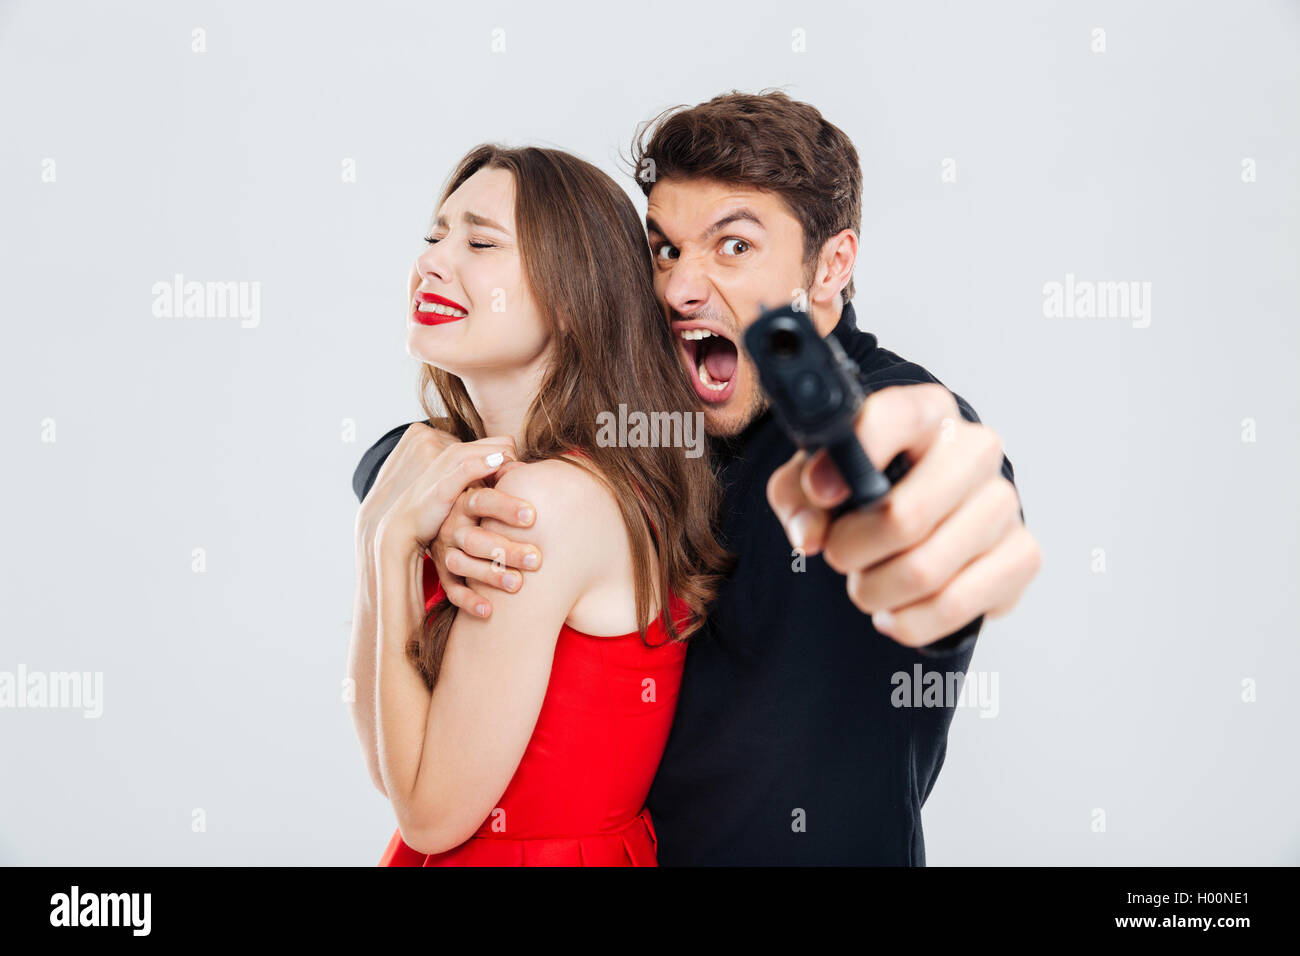 Furious criminal young man holding scared young woman and pointing with gun on you Stock Photo